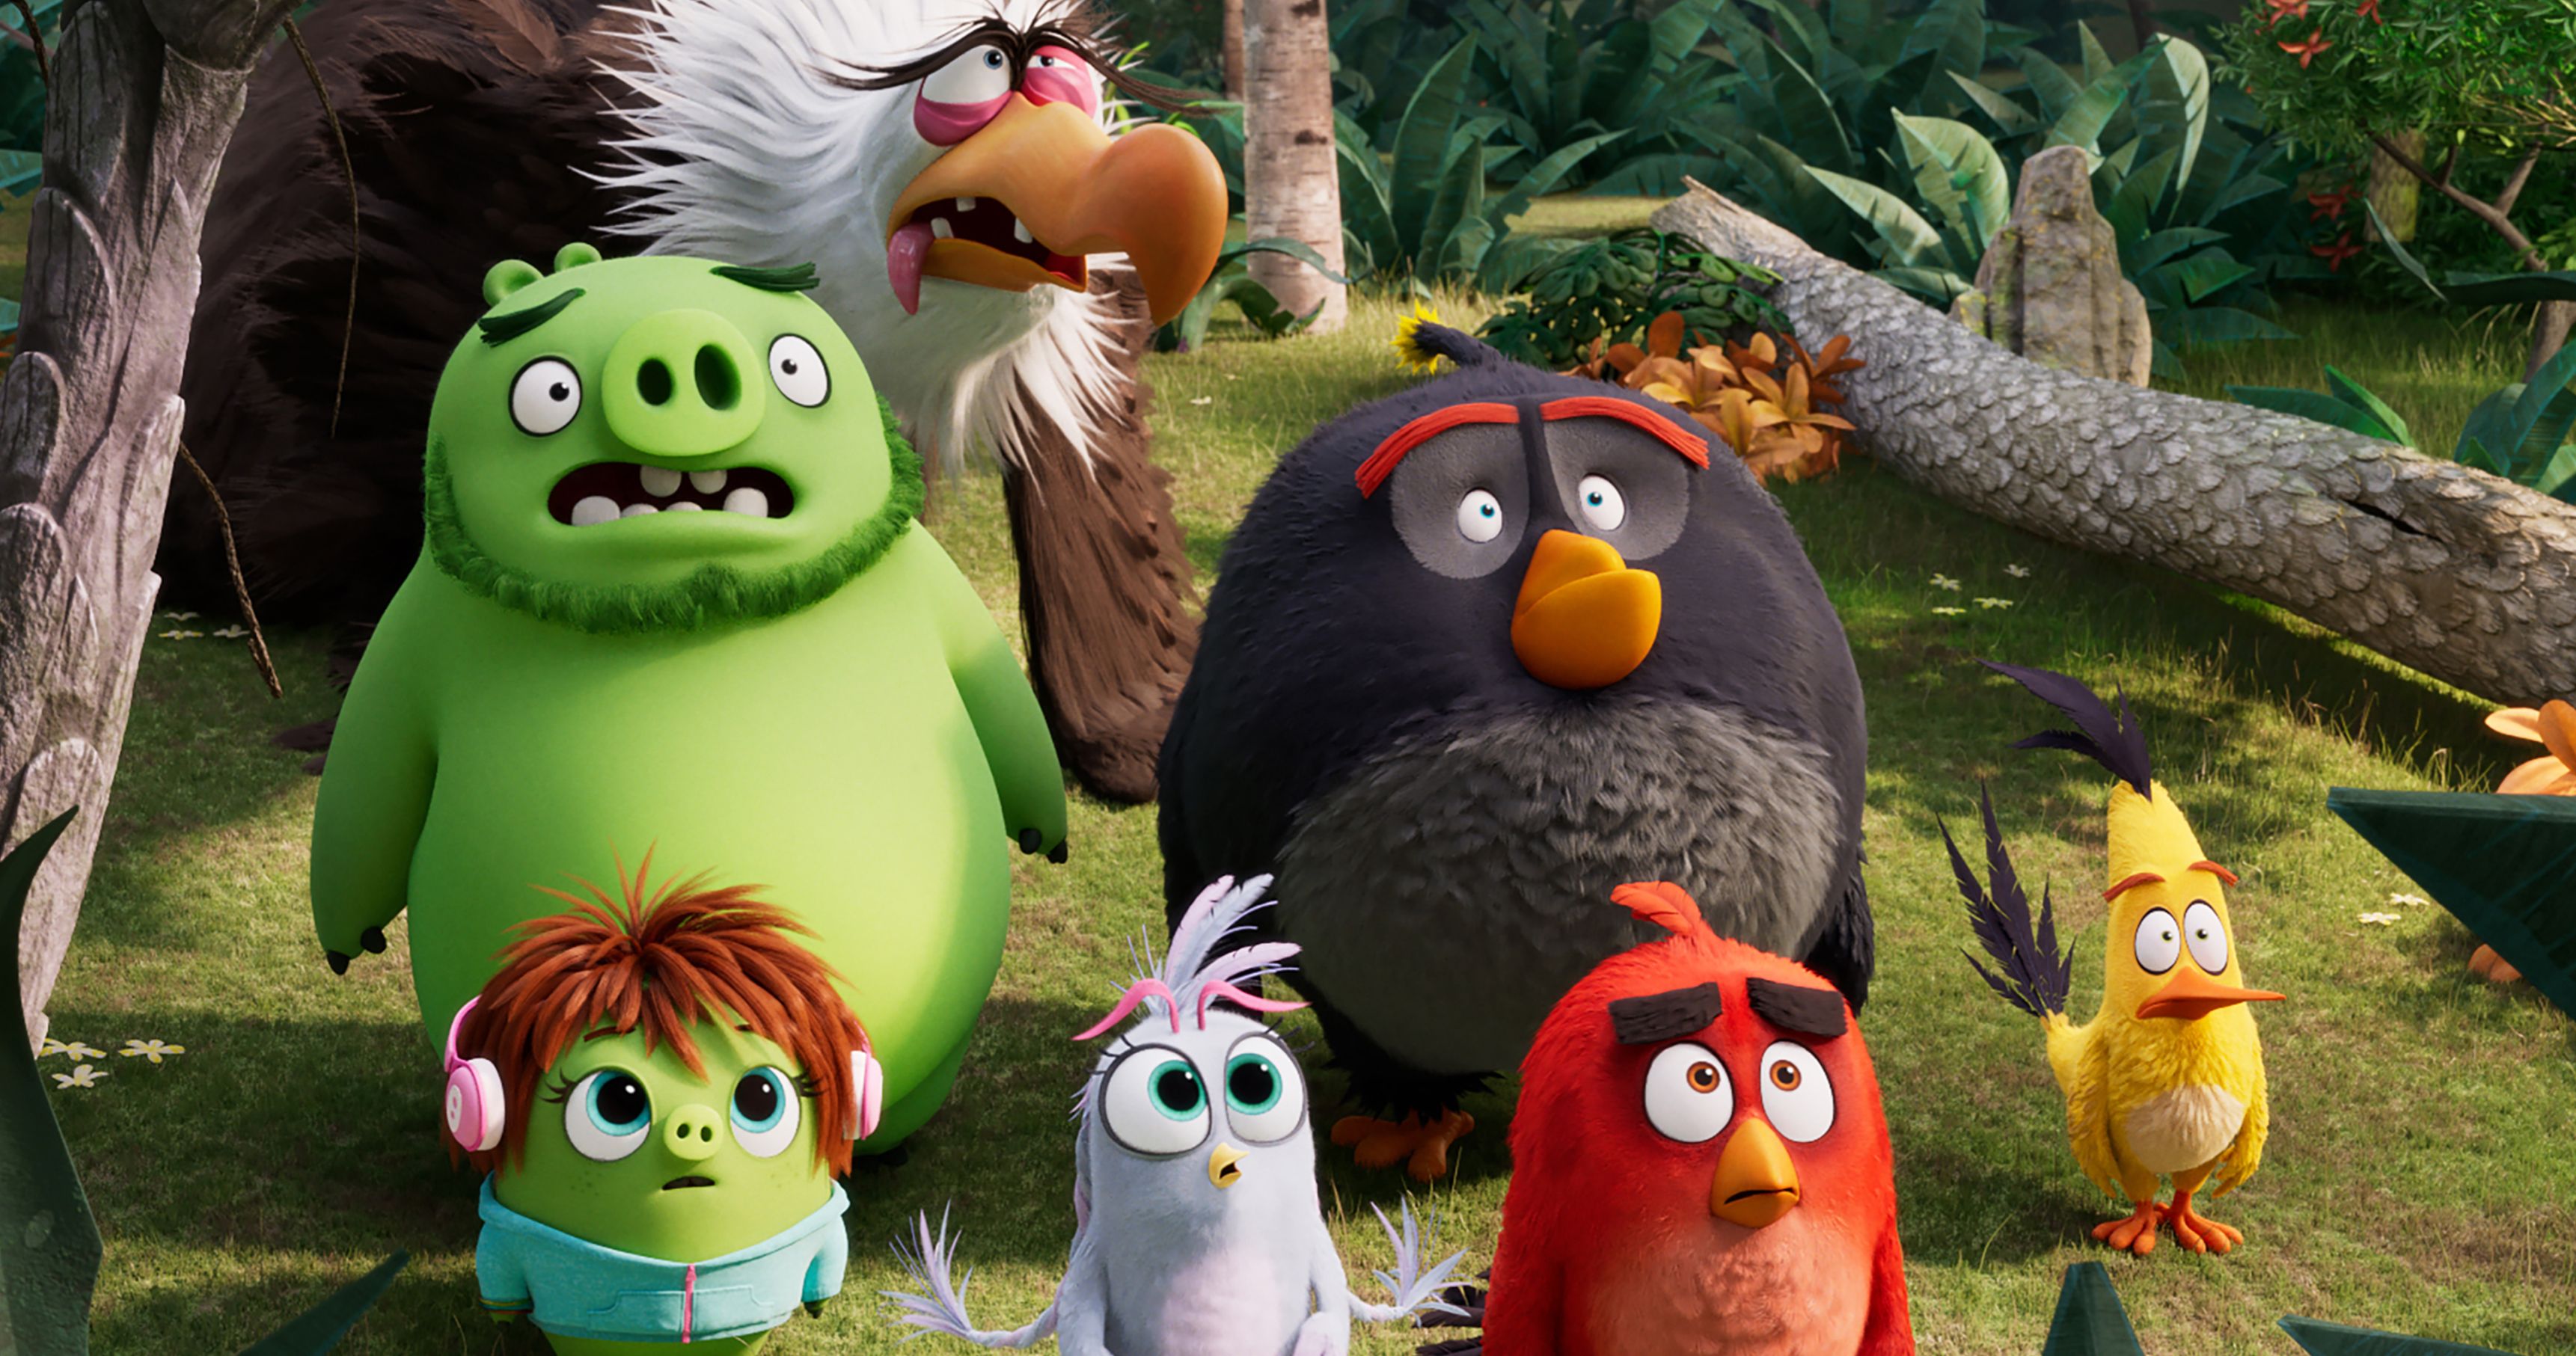 Angry Birds 2 Is Now Highest-Rated Video Game Movie, Did It Crack the Curse?